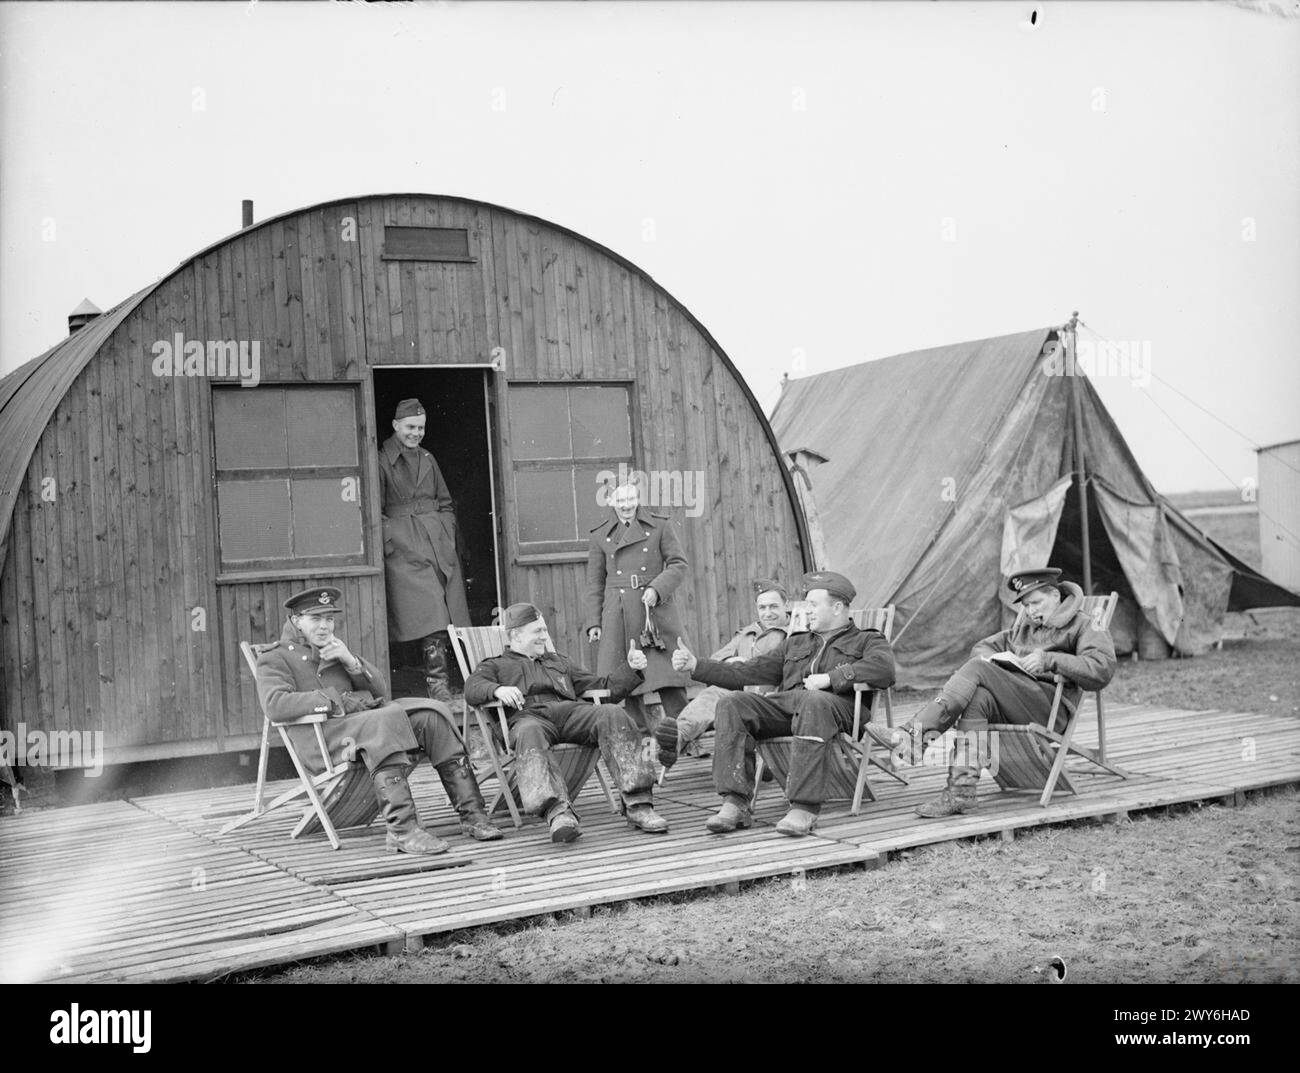 ROYAL AIR FORCE: FRANCE, 1939-1940. - Pilots of No. 607 Squadron RAF relax outside their crew room at Vitry-en-Artois. Those identified include Pilot Officer P L Parrott (first left), Flying Officer W F Blackadder (second right) and Flying Officer W E Gore (first right). Blackadder and the officer with whom he is exchanging a 'thumbs up' are still dressed in their pre-war Royal Auxiliary Air Force blue overalls with the Squadron badge emblazoned on the front left pockets. , Royal Air Force, Maintenance Unit, 67 Stock Photo